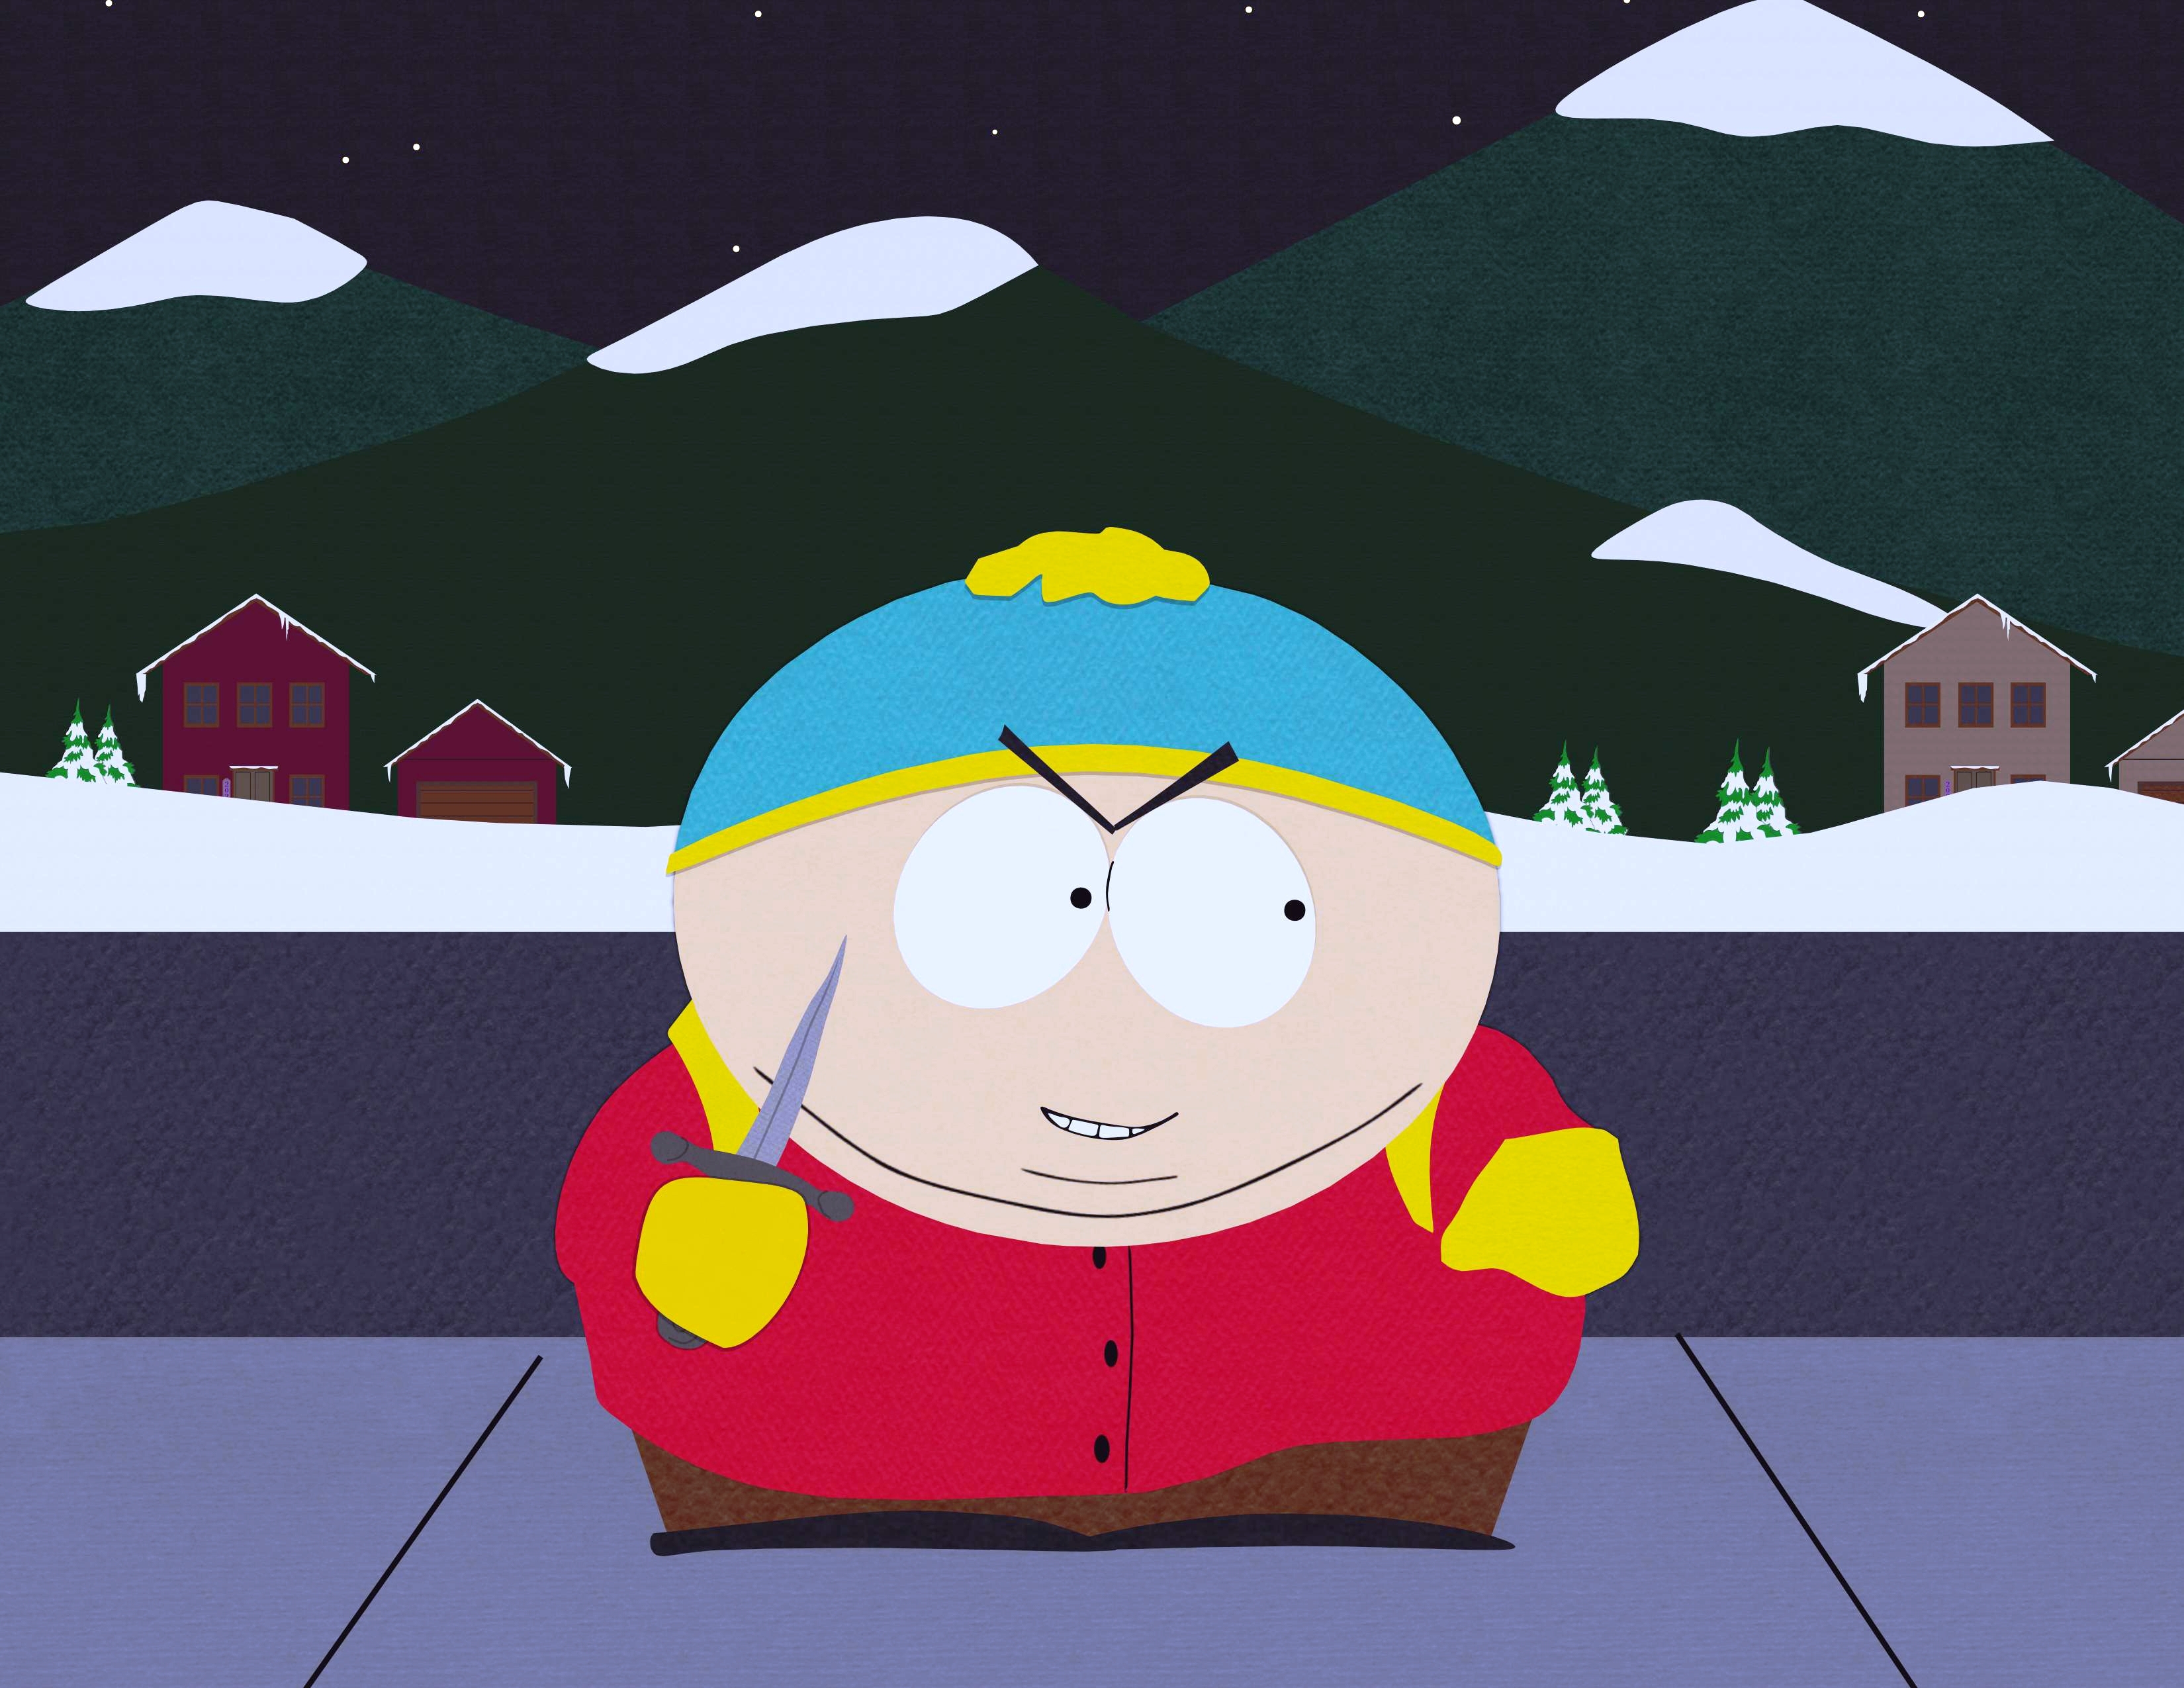 South Park Cartman Wallpapers posted by Ethan Cunningham.